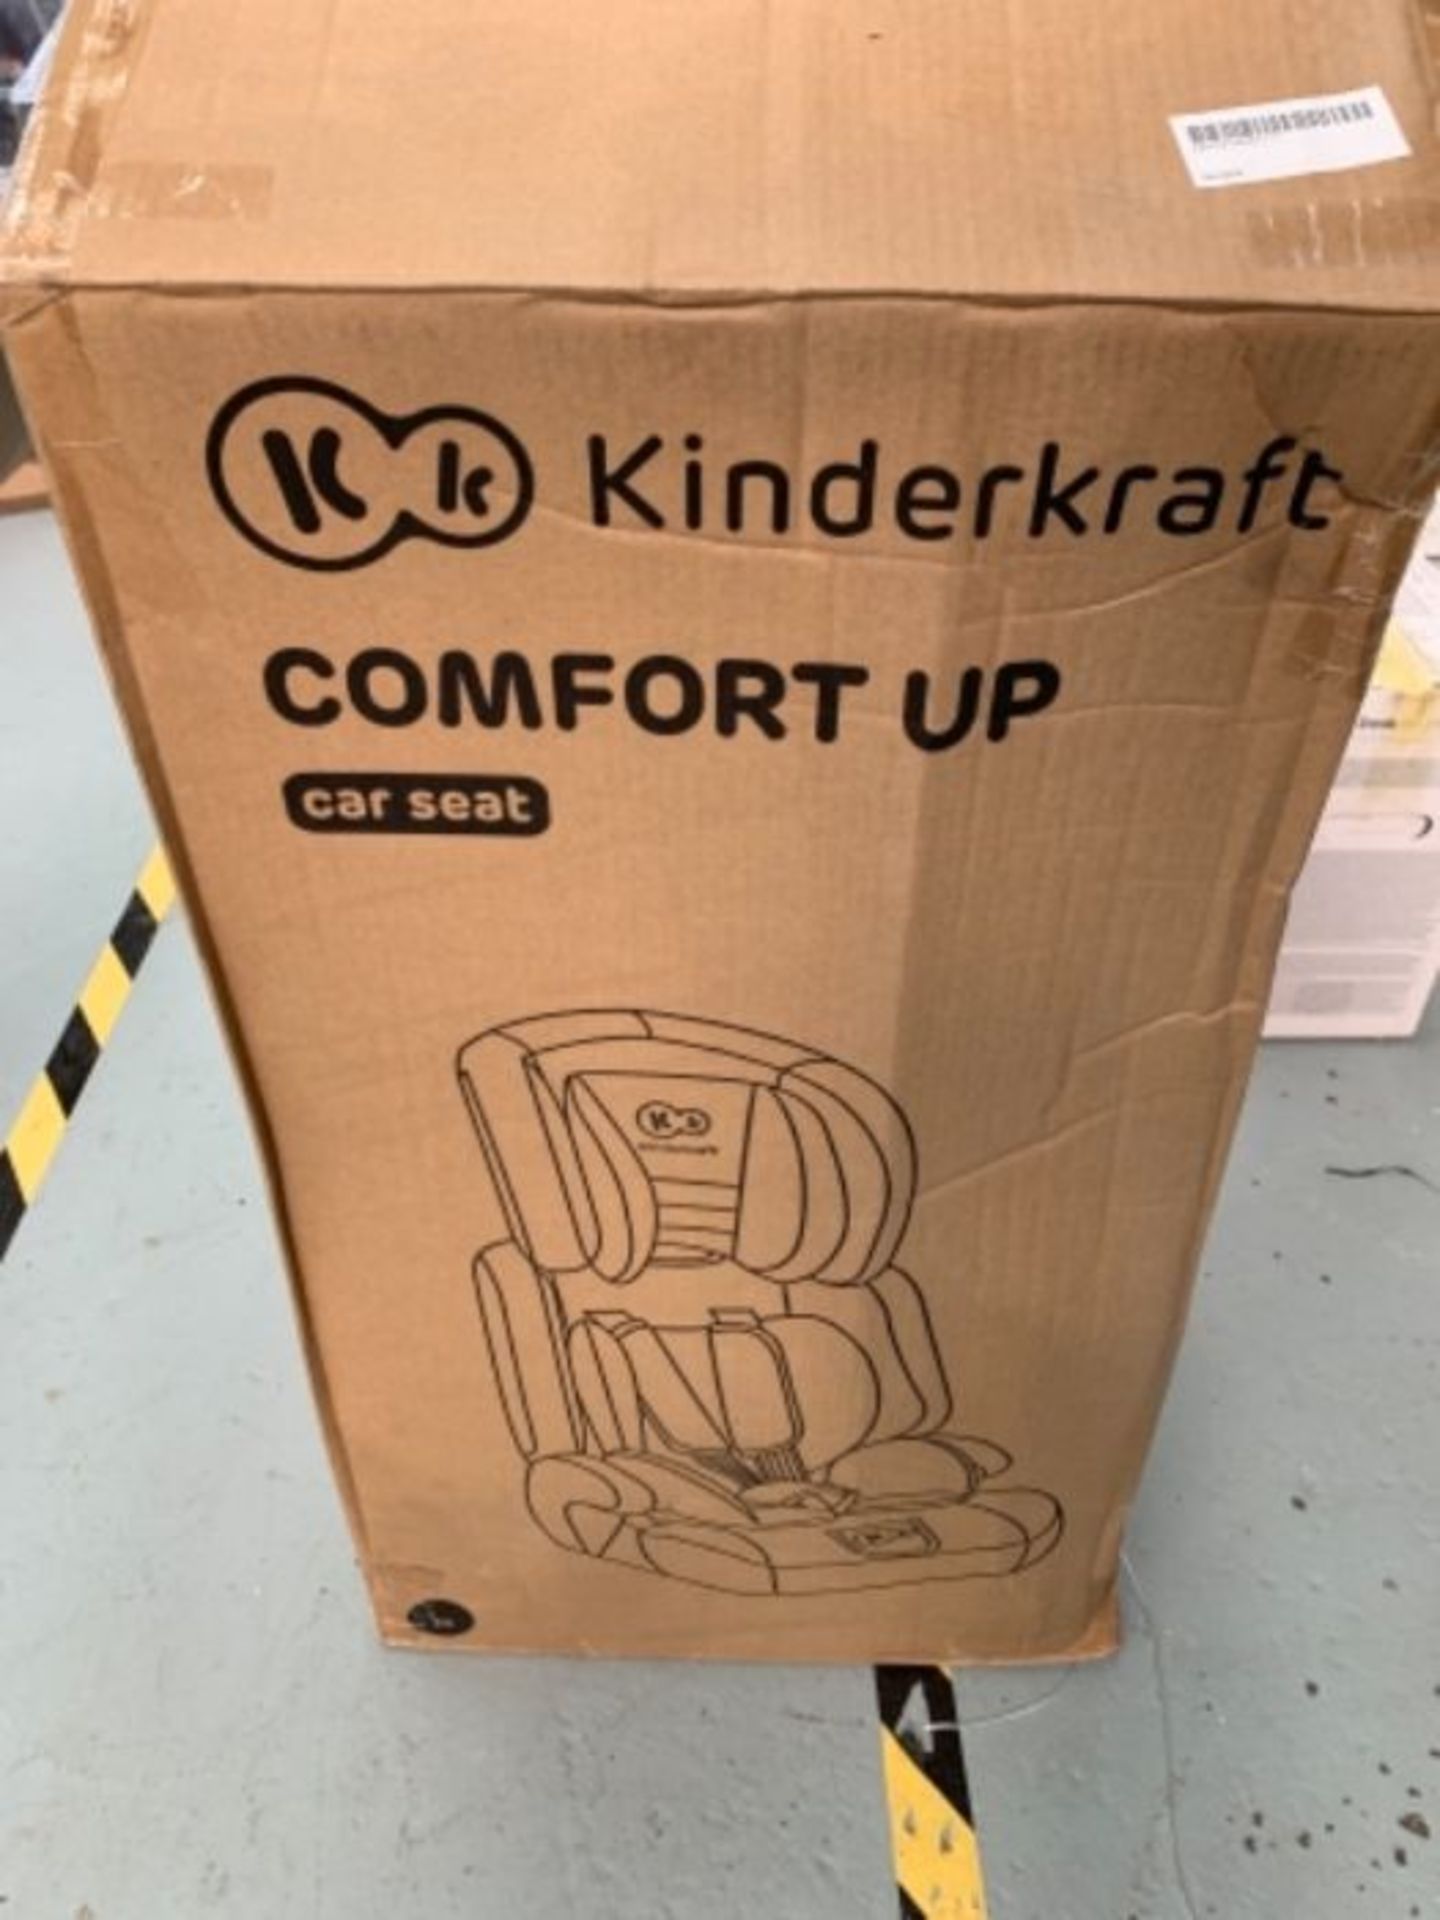 Kinderkraft Car Seat Comfort UP, Booster Child Seat, with 5 Point Harness, Adjustable - Image 2 of 3